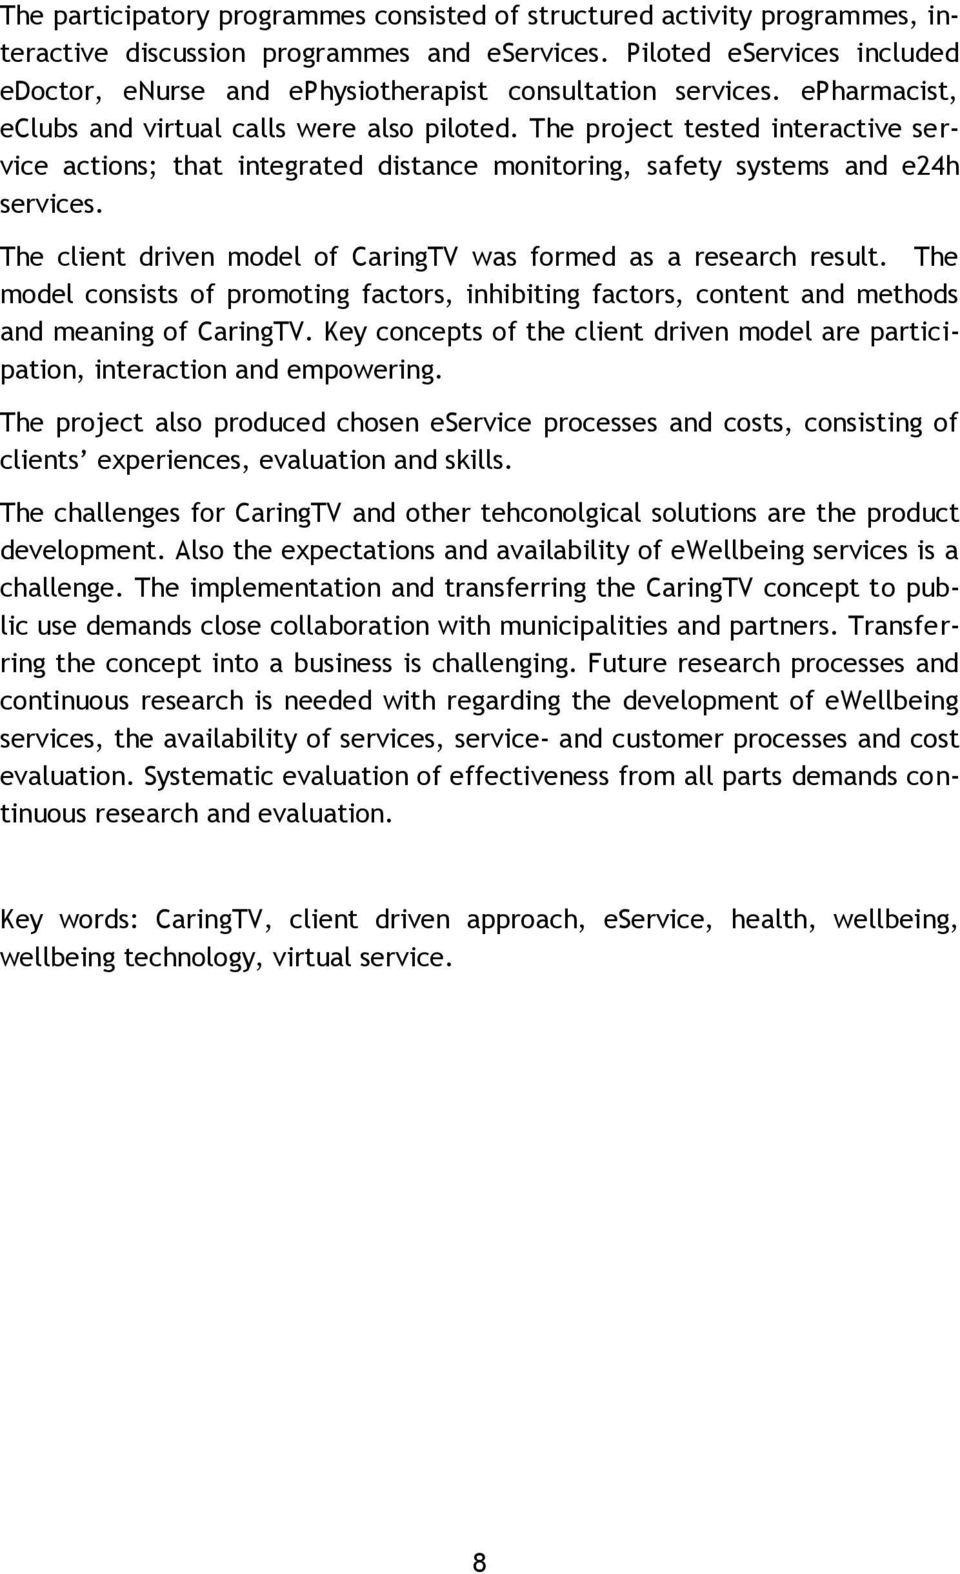 The project tested interactive service actions; that integrated distance monitoring, safety systems and e24h services. The client driven model of CaringTV was formed as a research result.